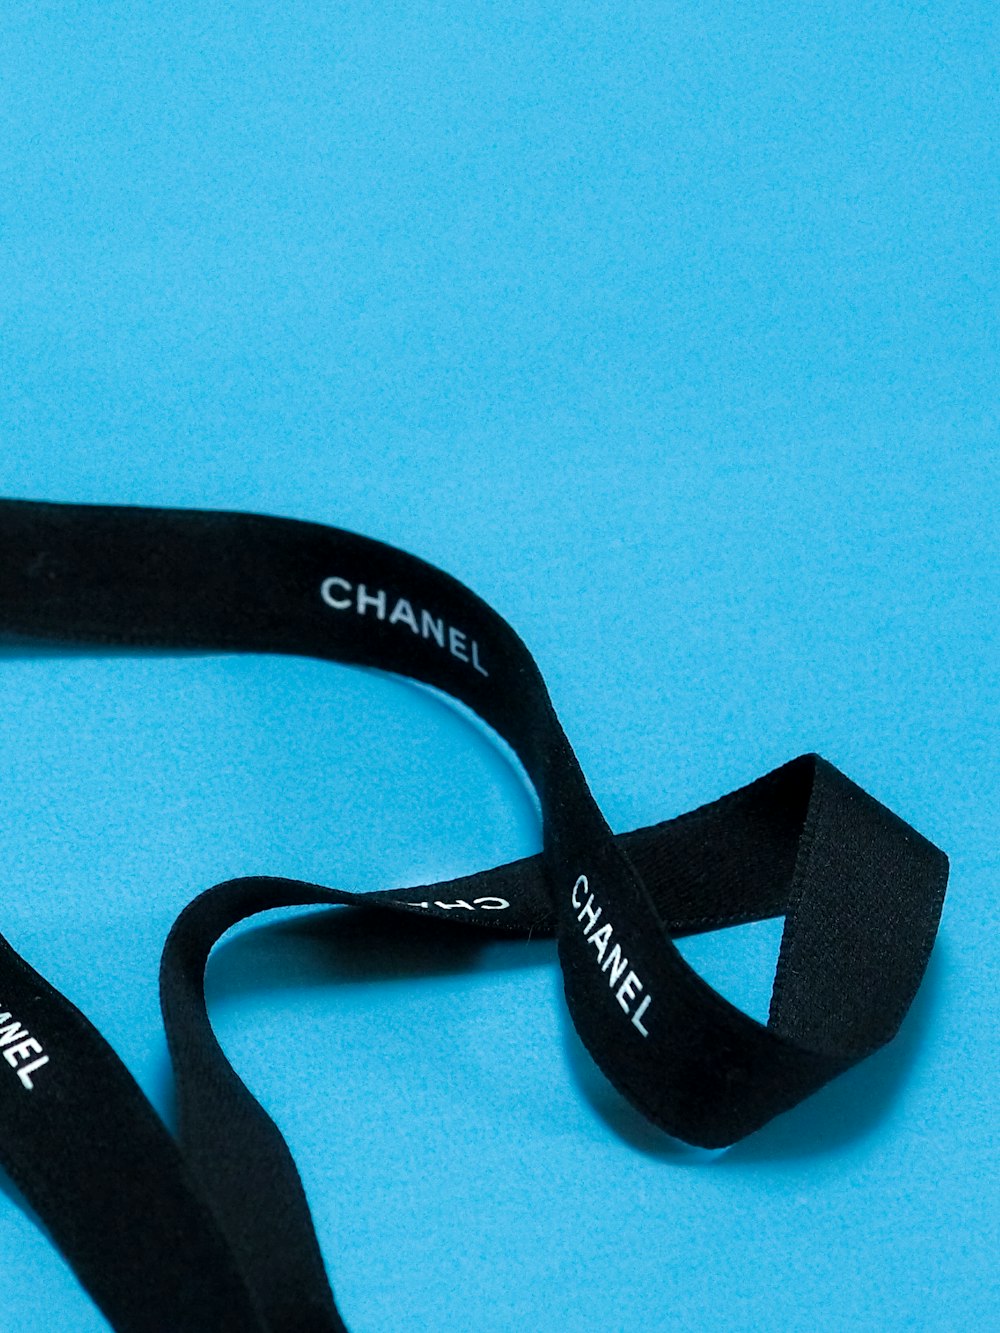 a black lanyard with the words chanel on it